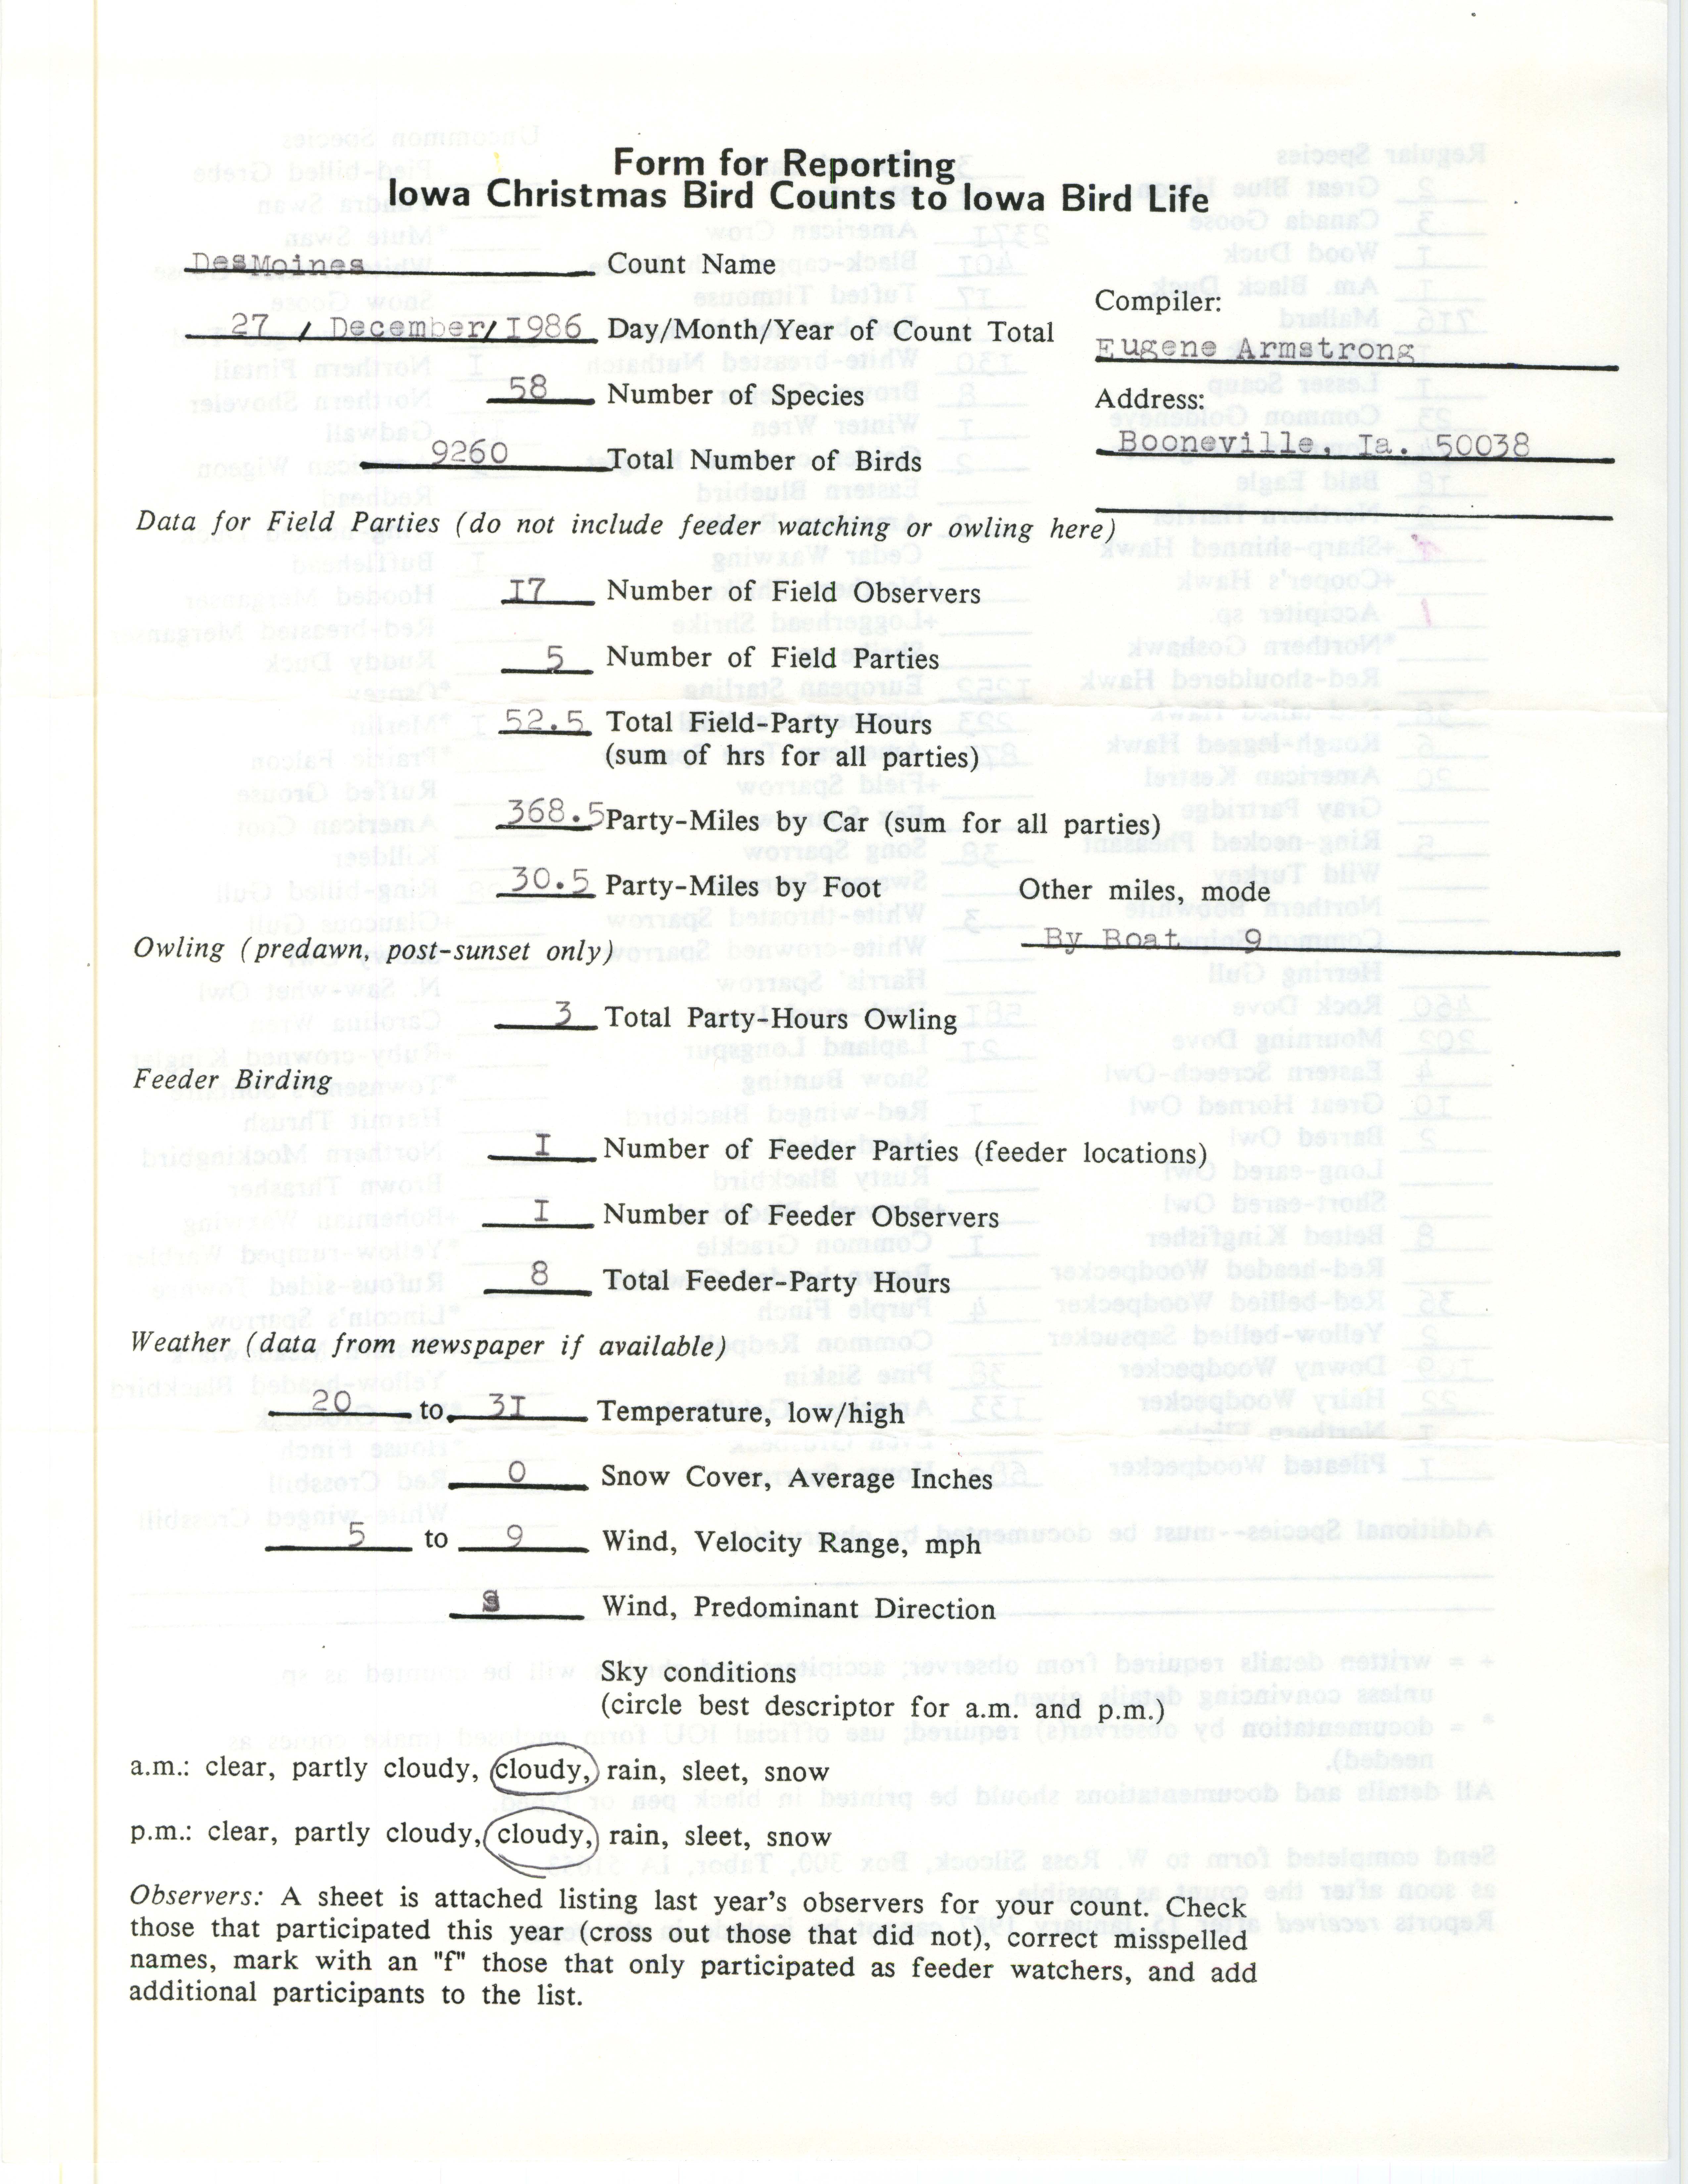 Form for reporting Iowa Christmas bird counts to Iowa Bird Life, Eugene Armstrong, December 27, 1986